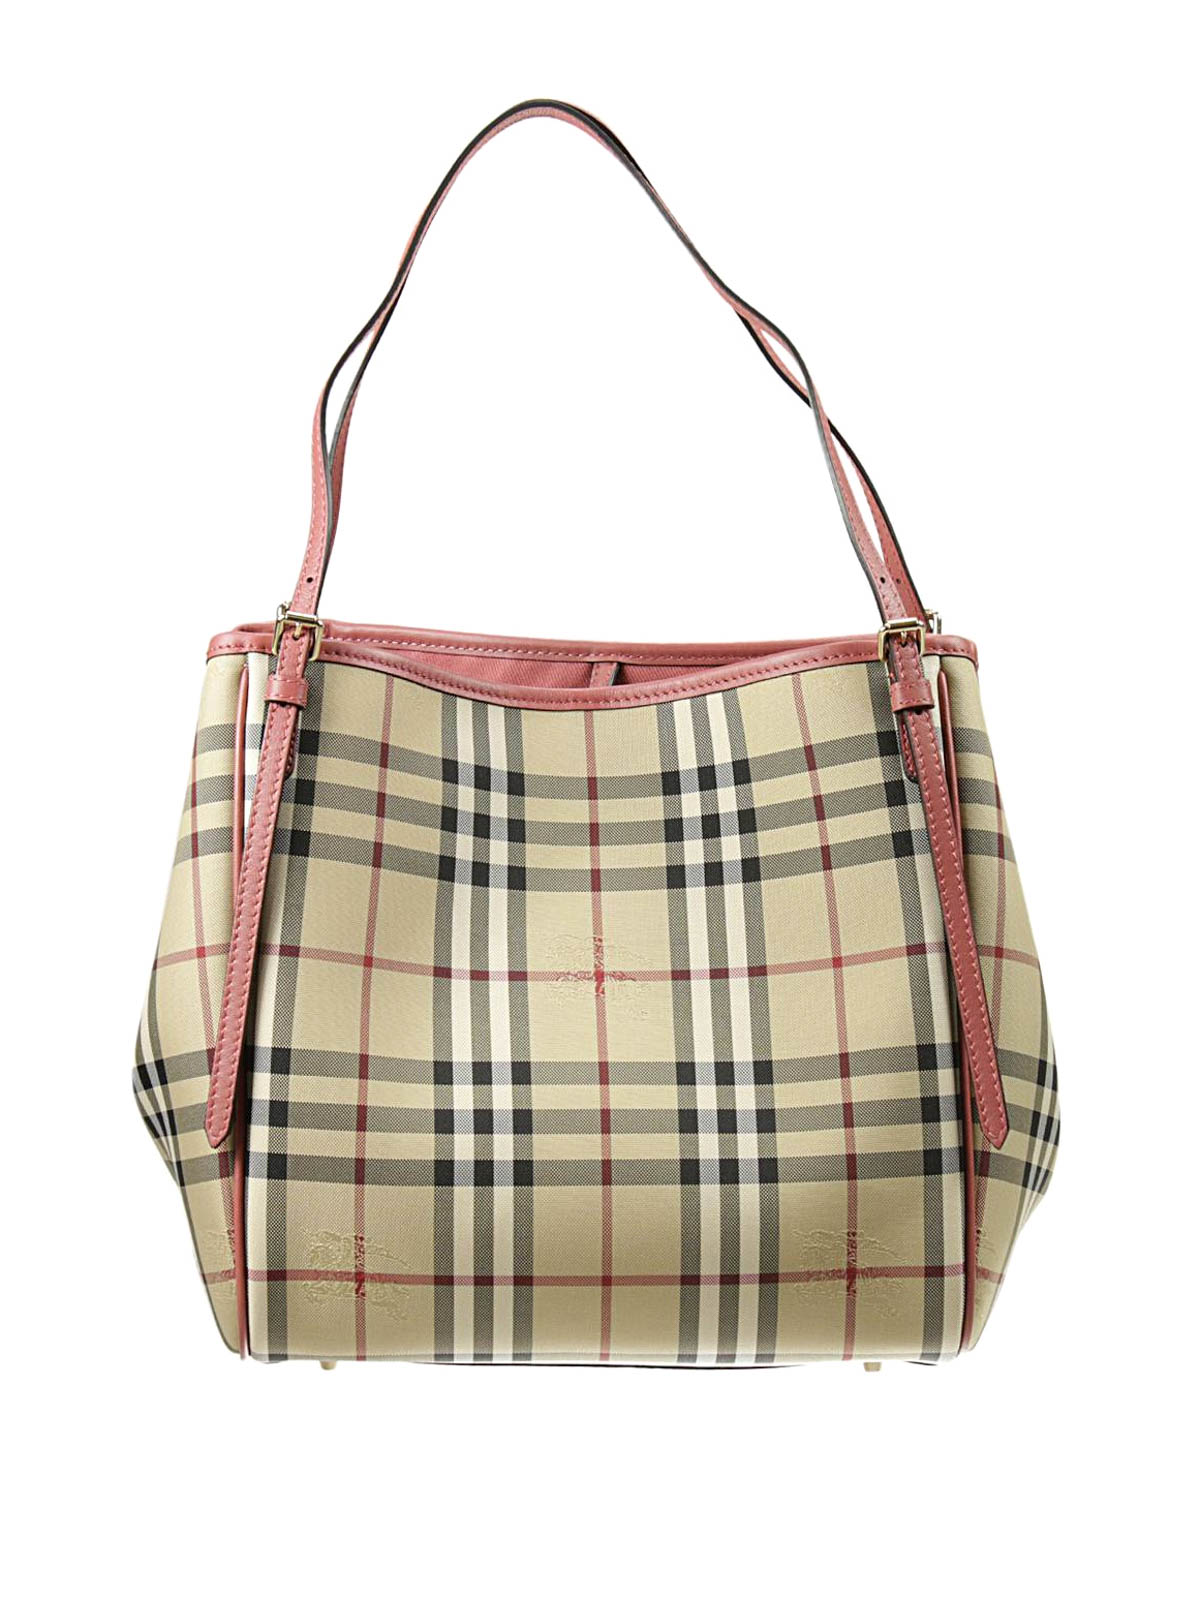 Burberry - The Canter Horseferry Check tote - totes bags - 4012454HNC5130B